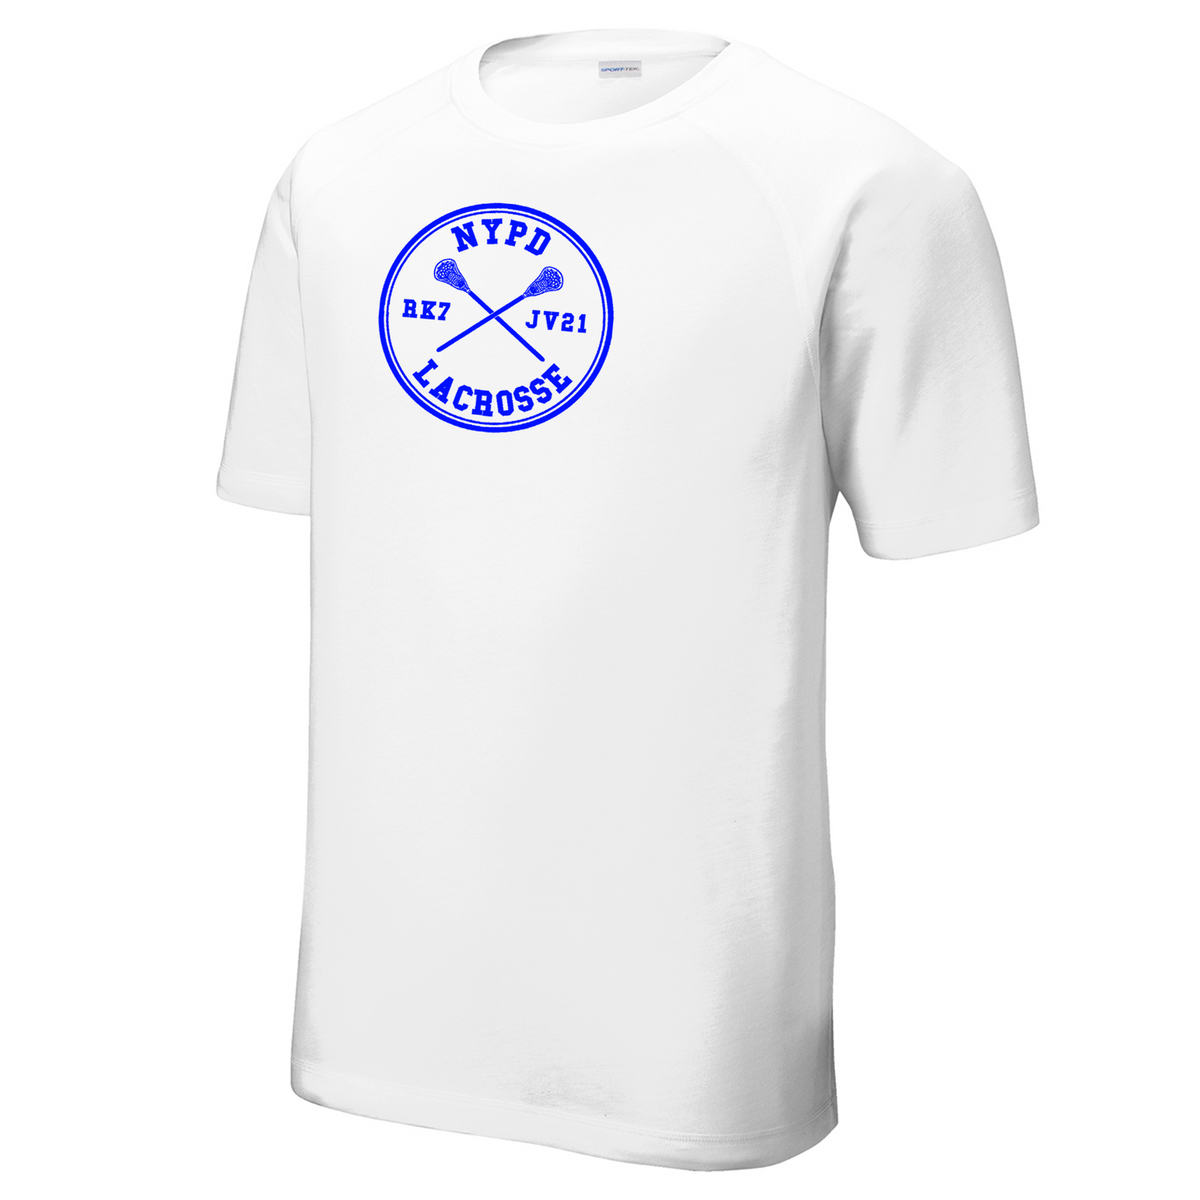 NYPD Lacrosse Raglan CottonTouch Tee